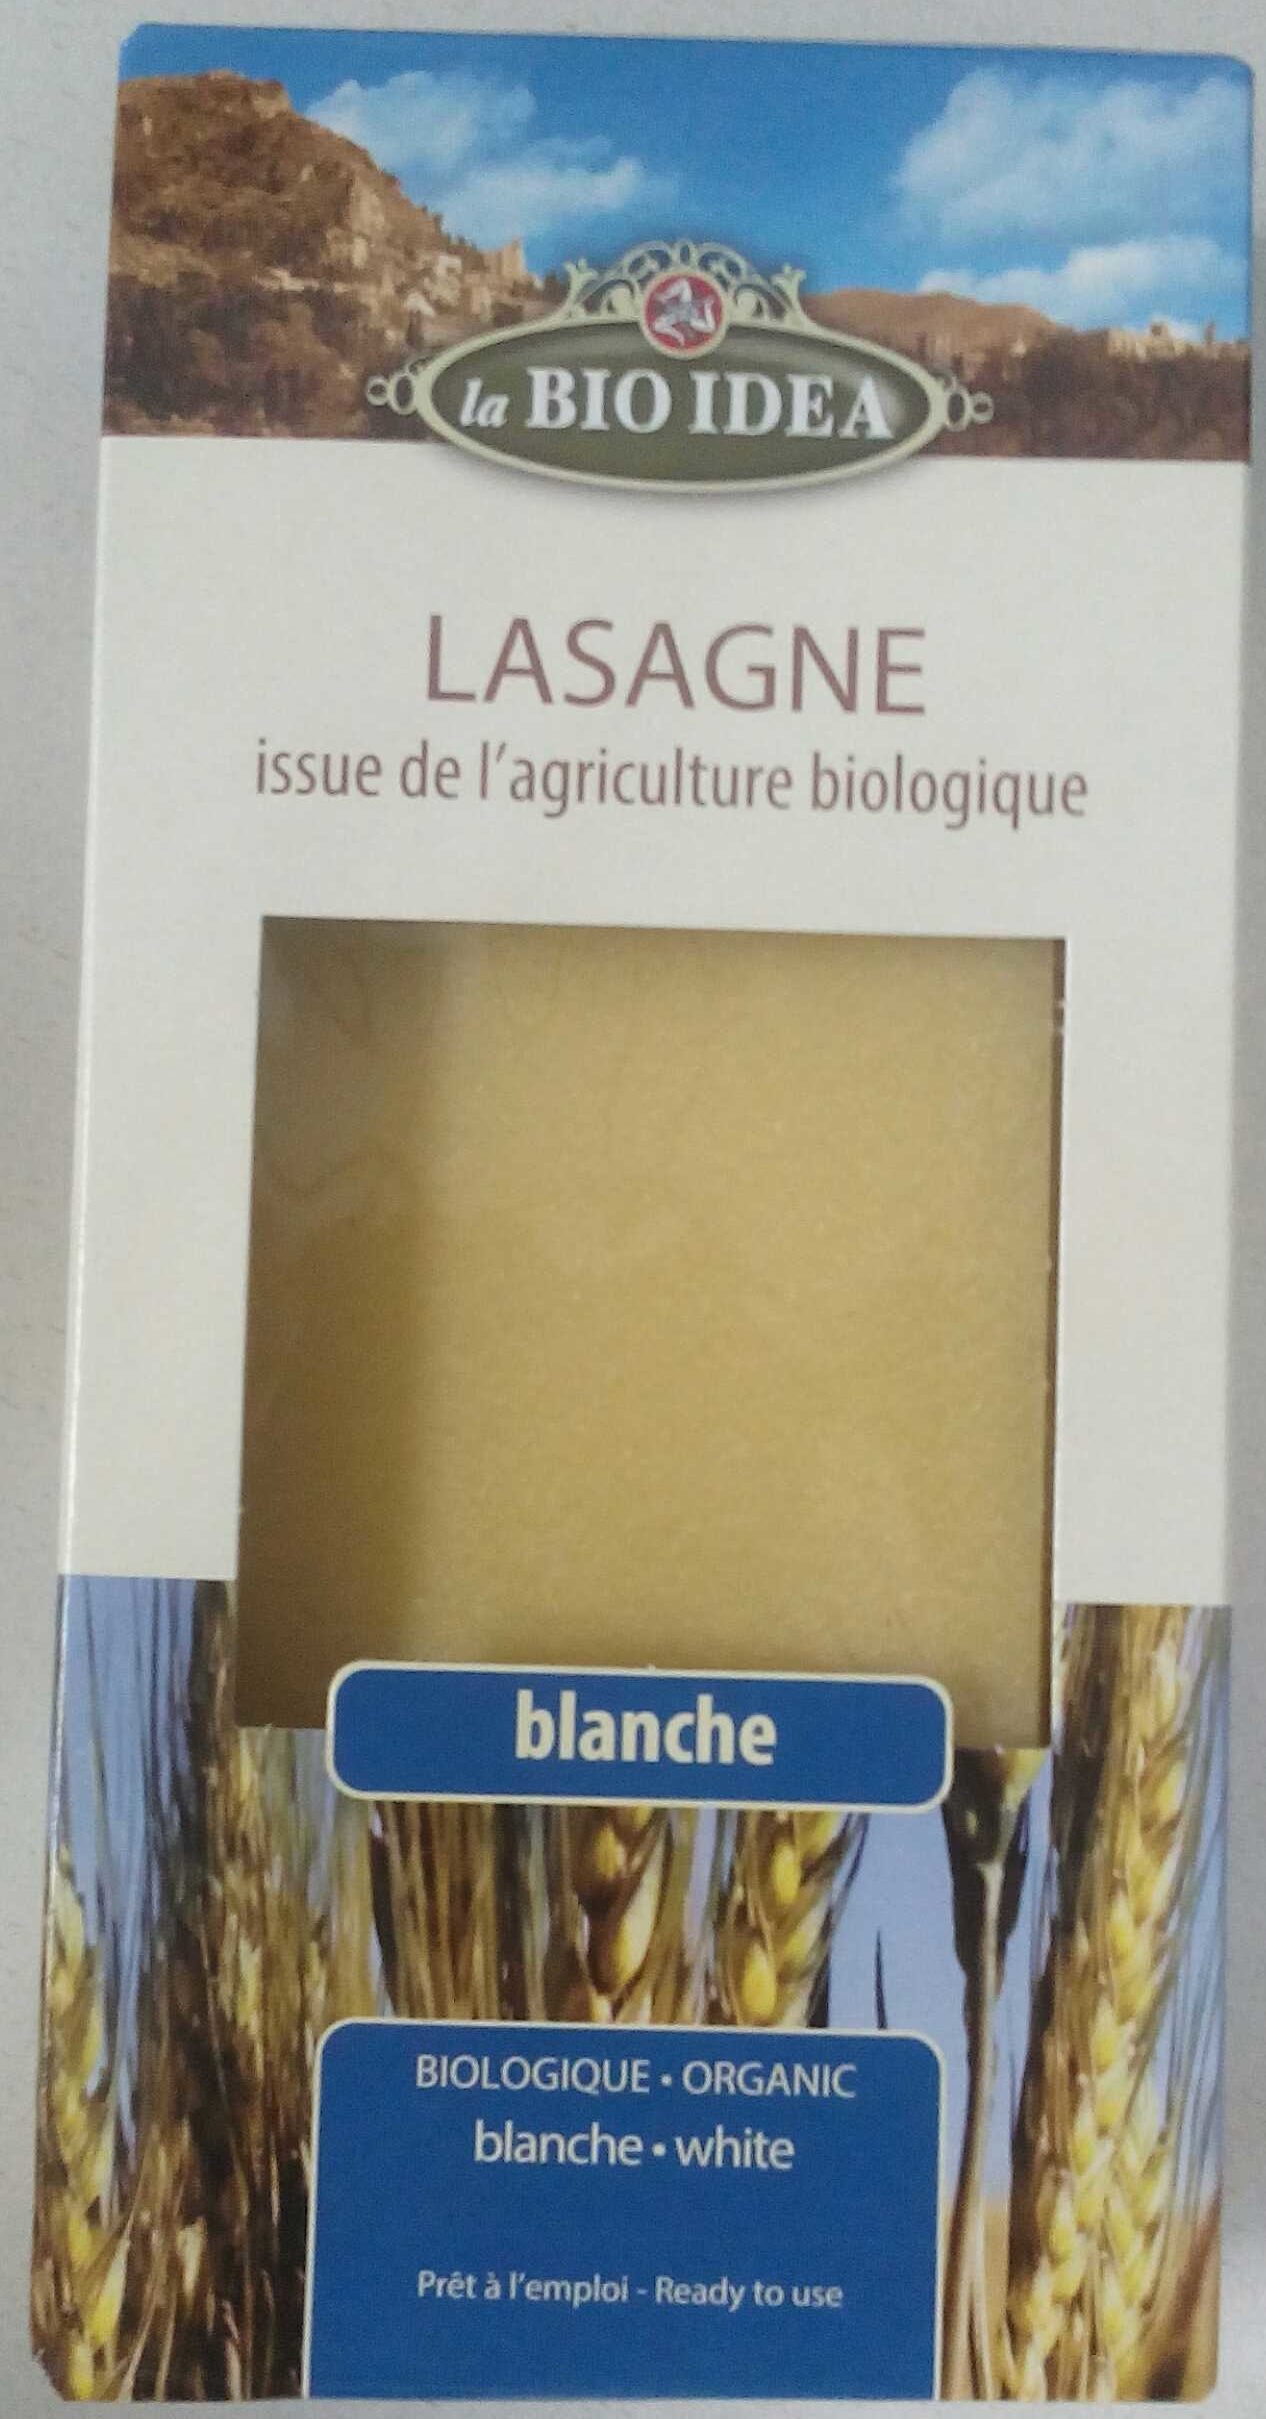 Lasagne blanche - Product - fr